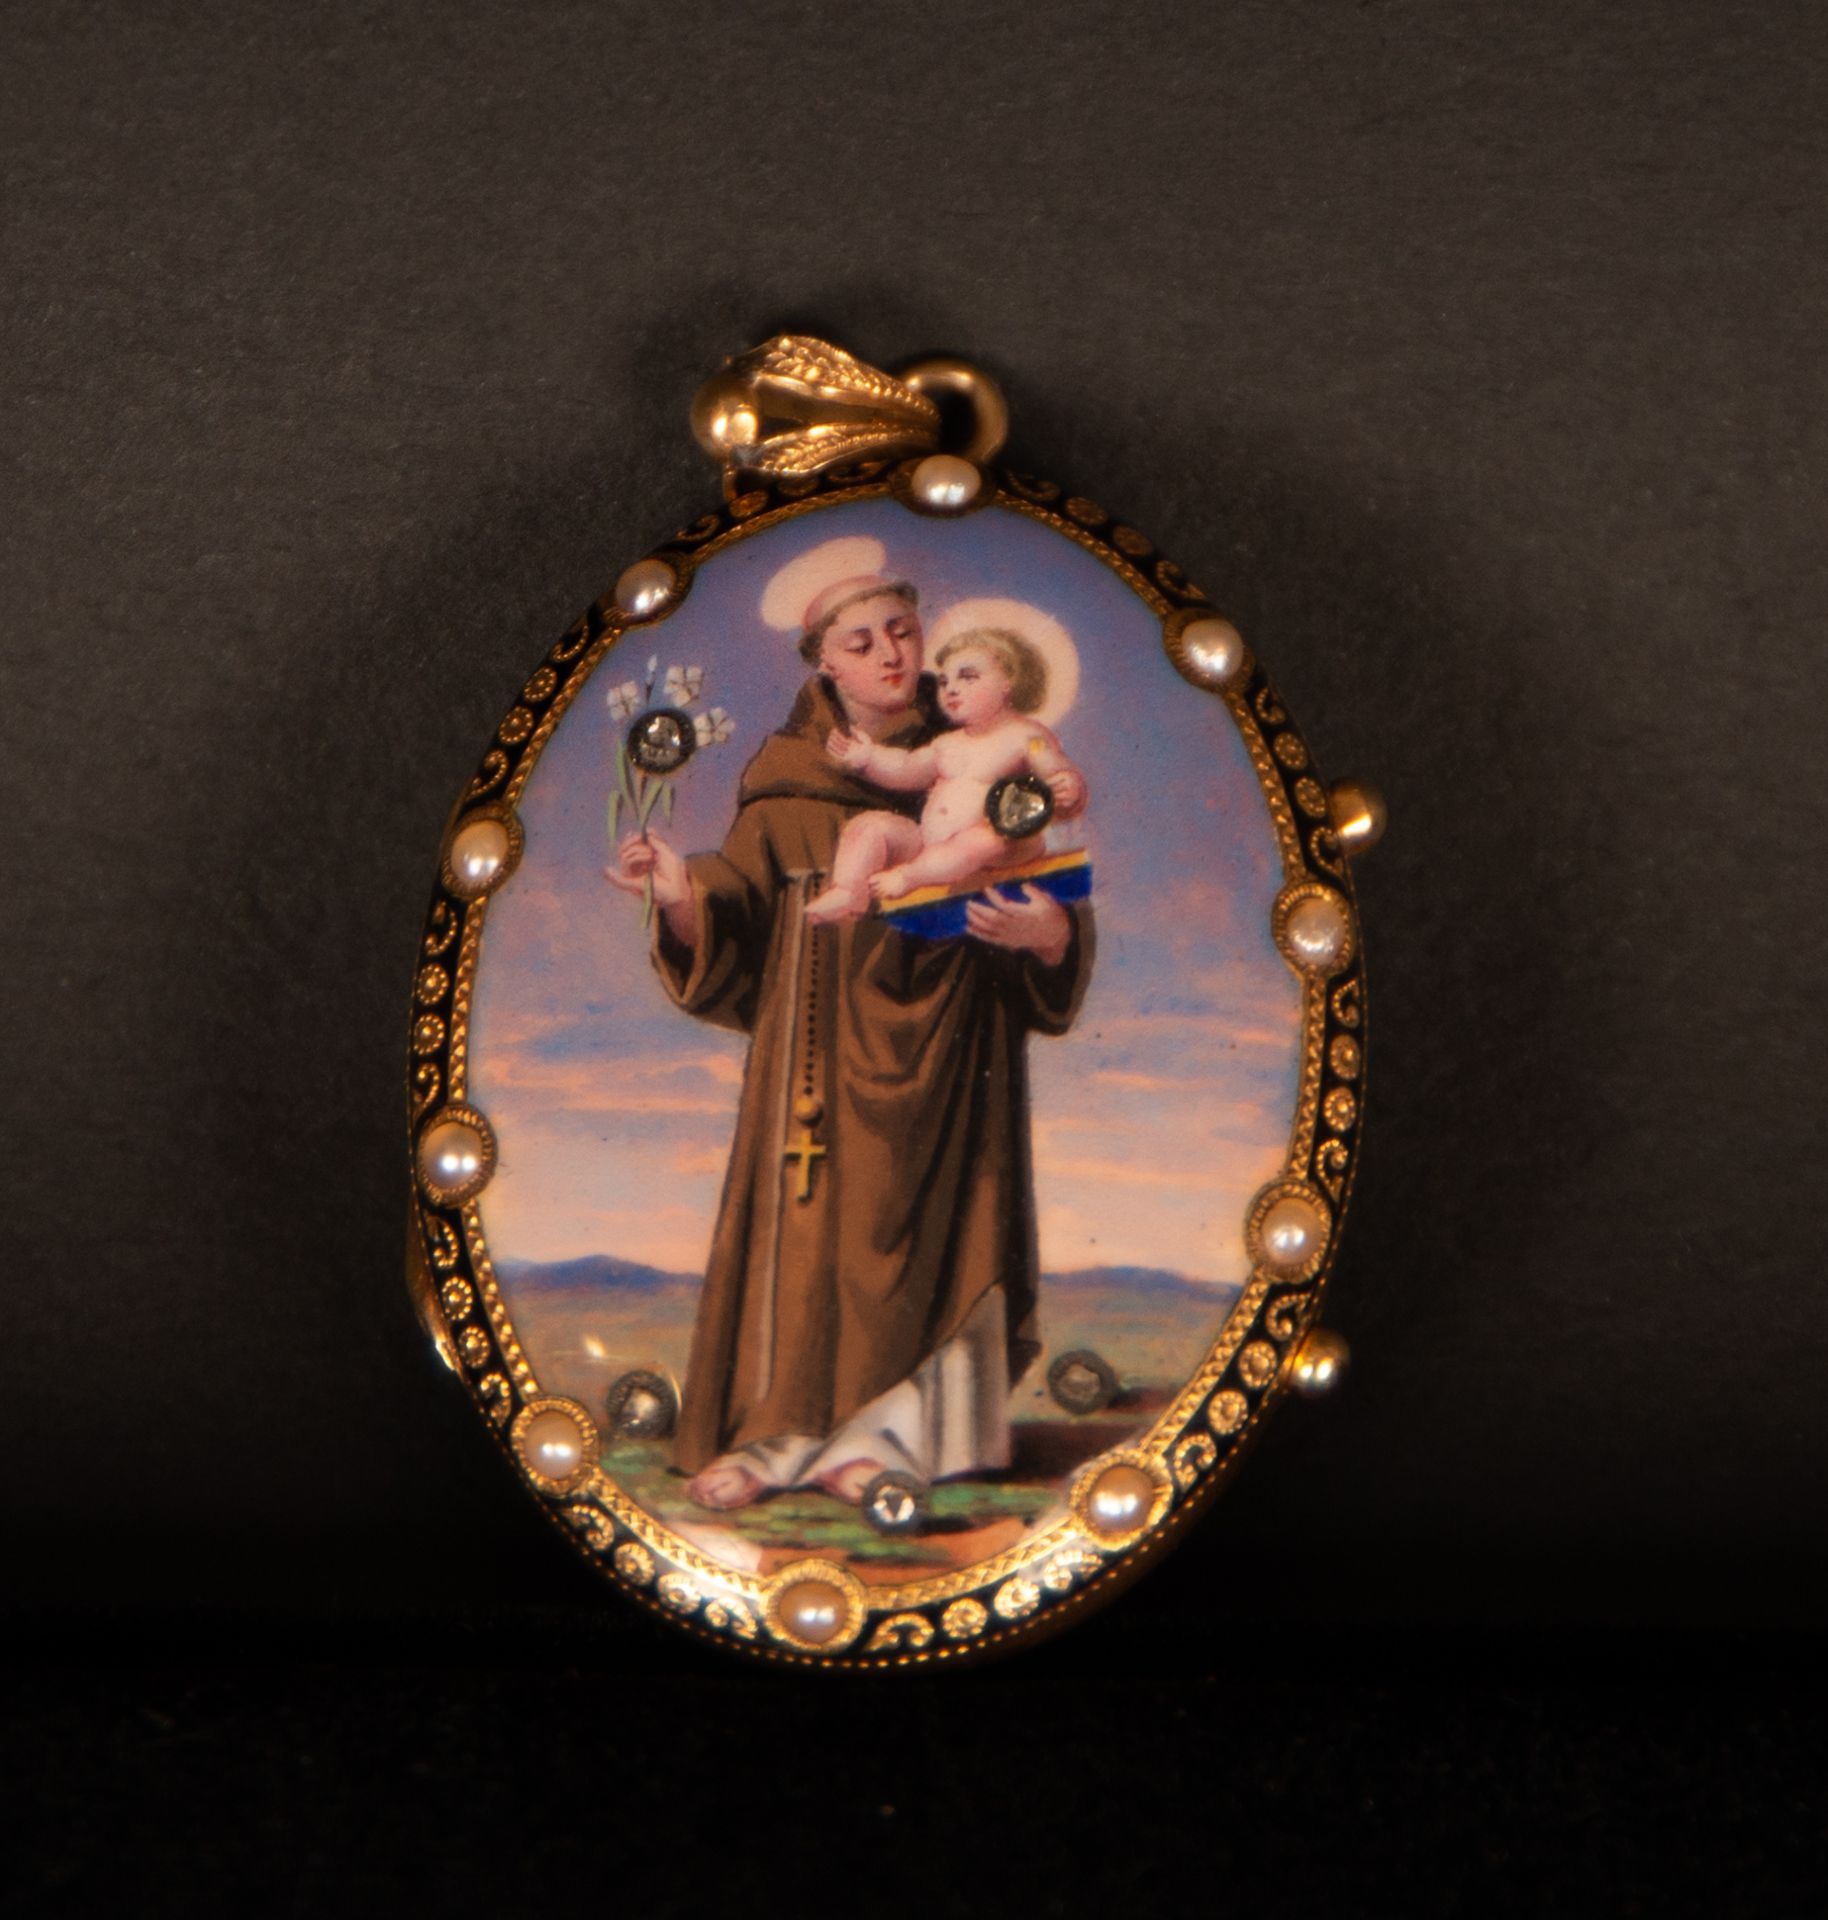 Hair clip in gold, freshwater pearls and enamels of Saint Francis with the Child, 19th century